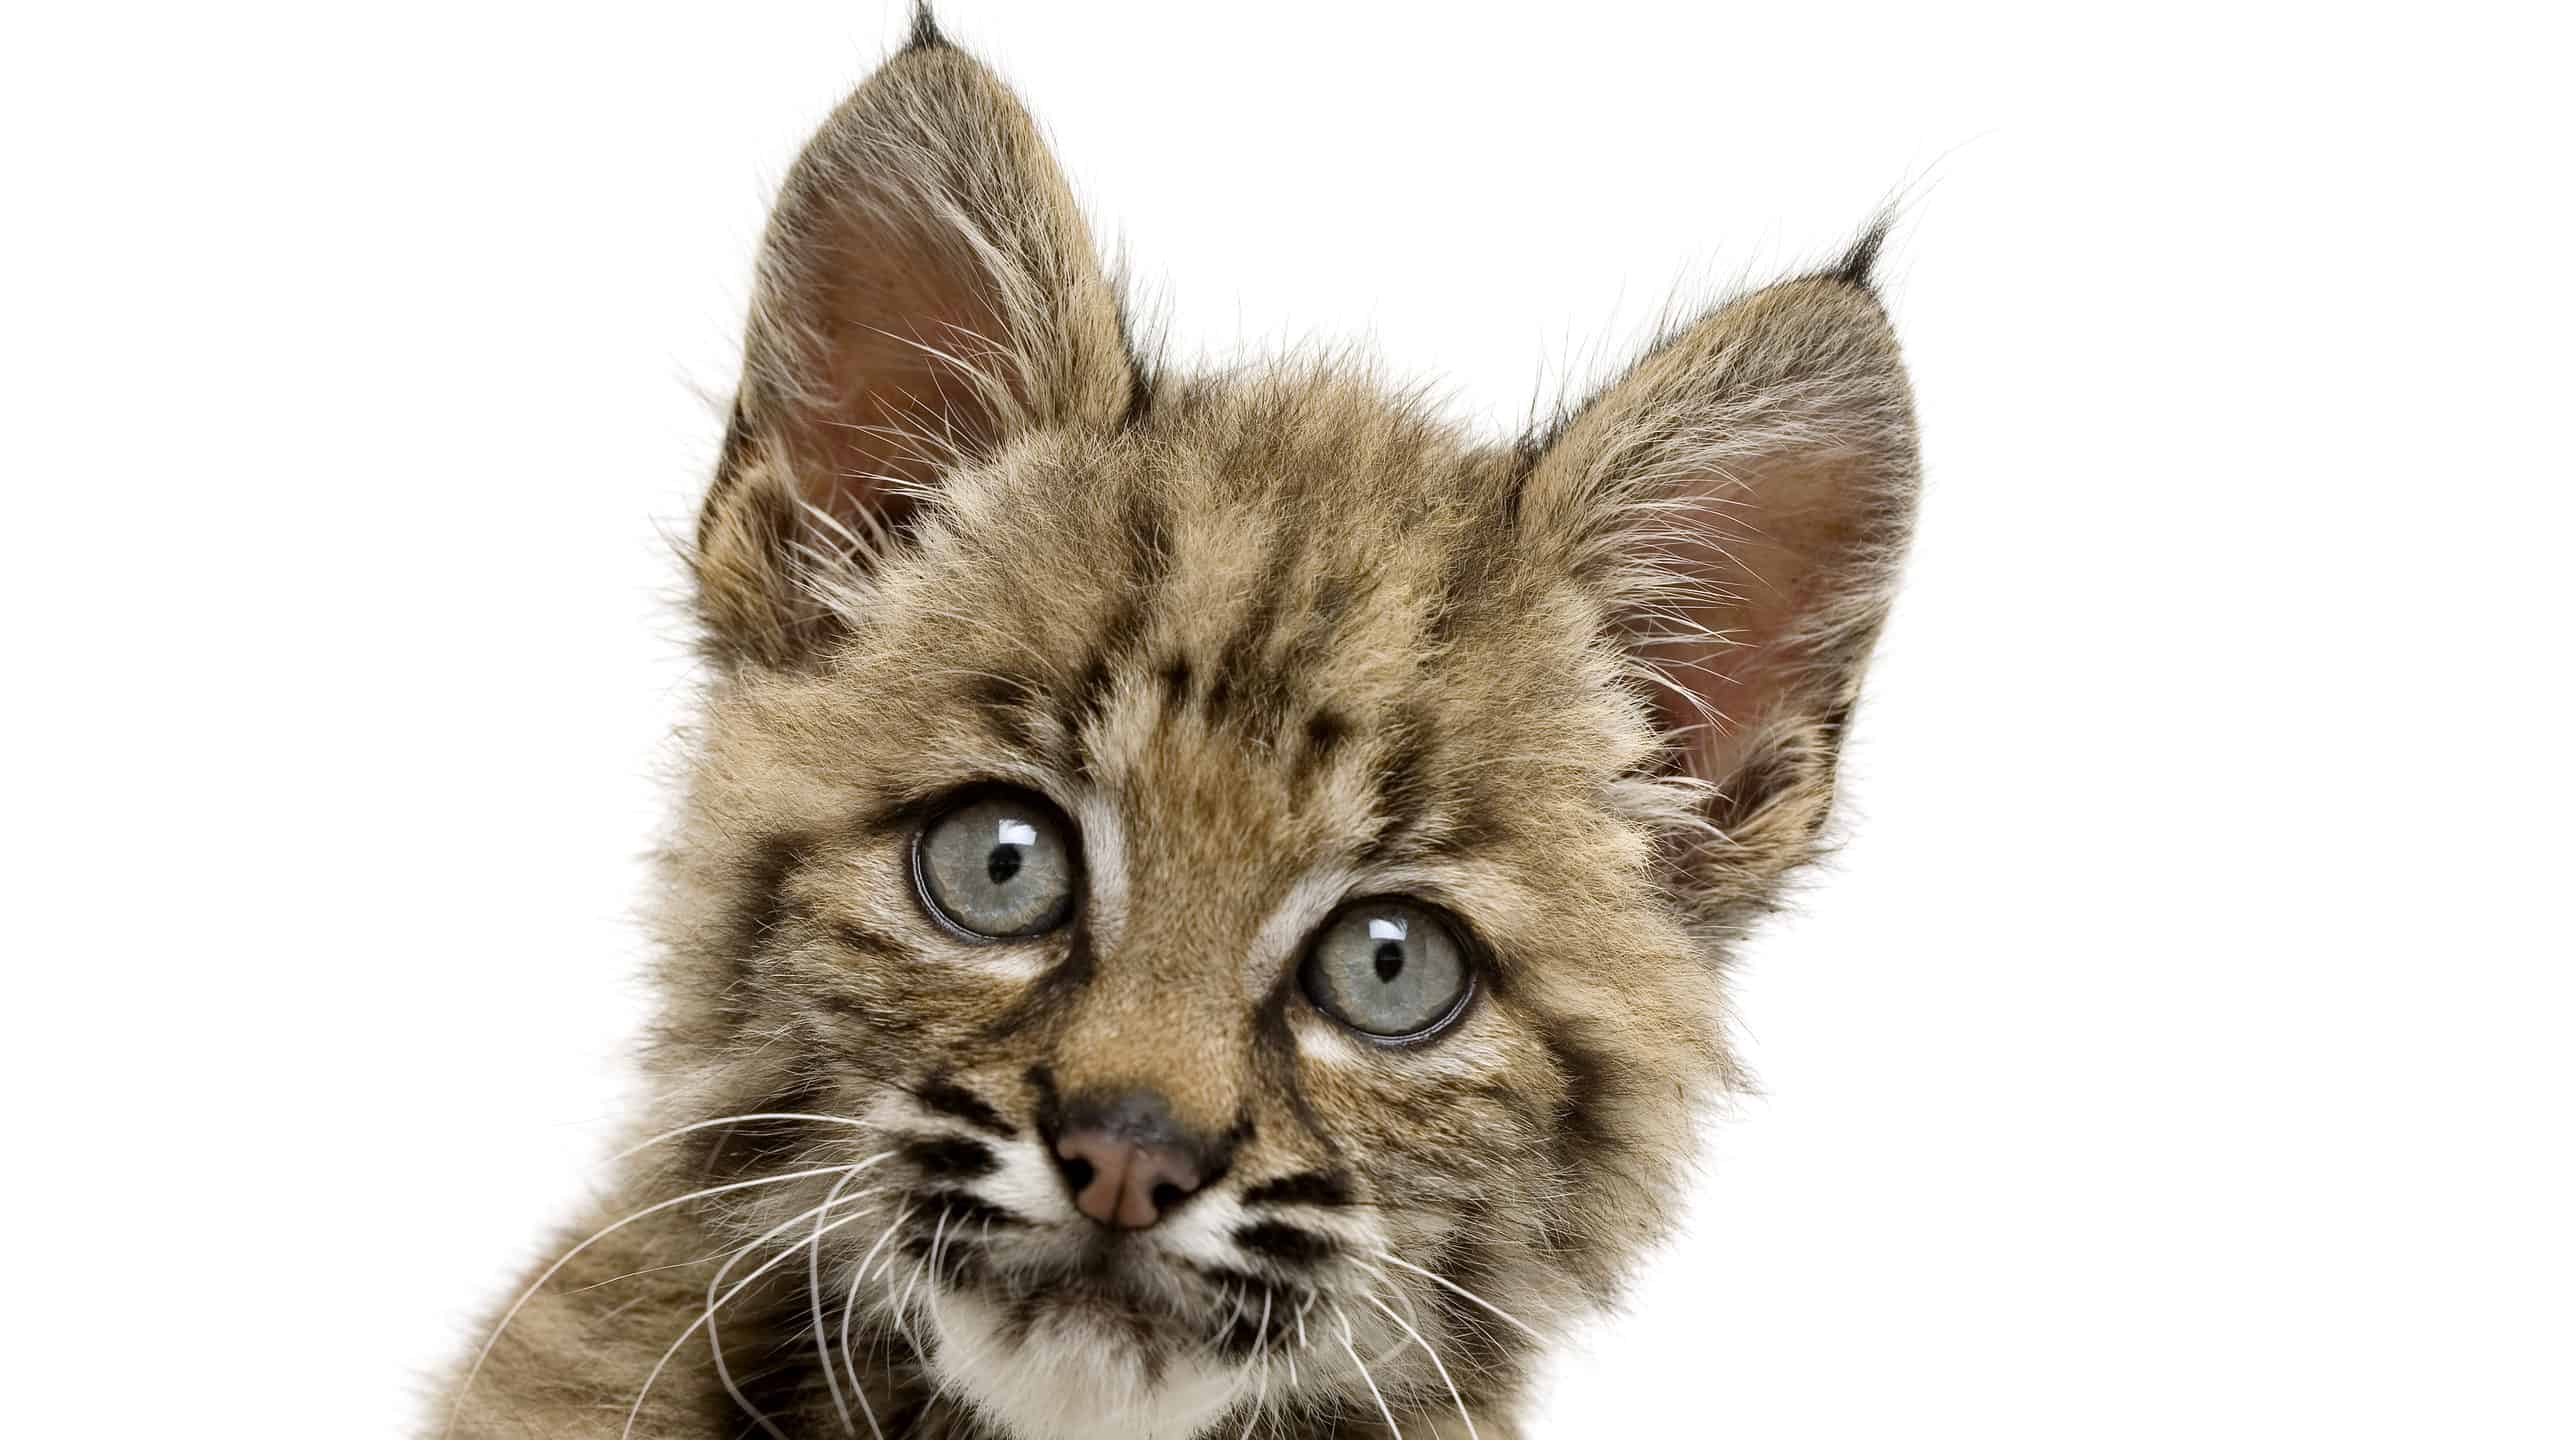 Beautiful baby bobcat face with eyes wide open